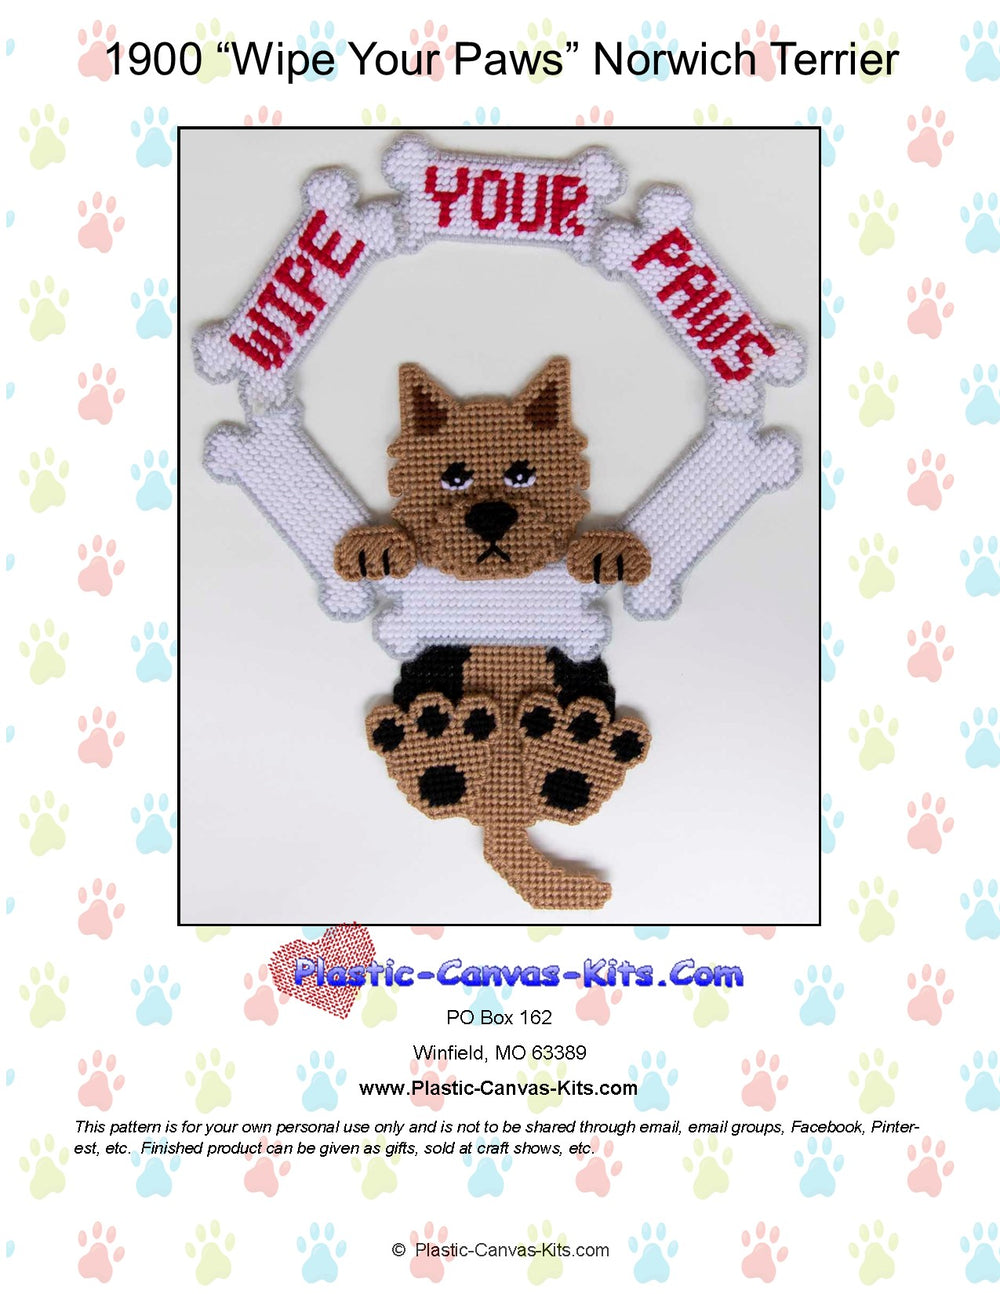 Norwich Terrier- Wipe Your Paws